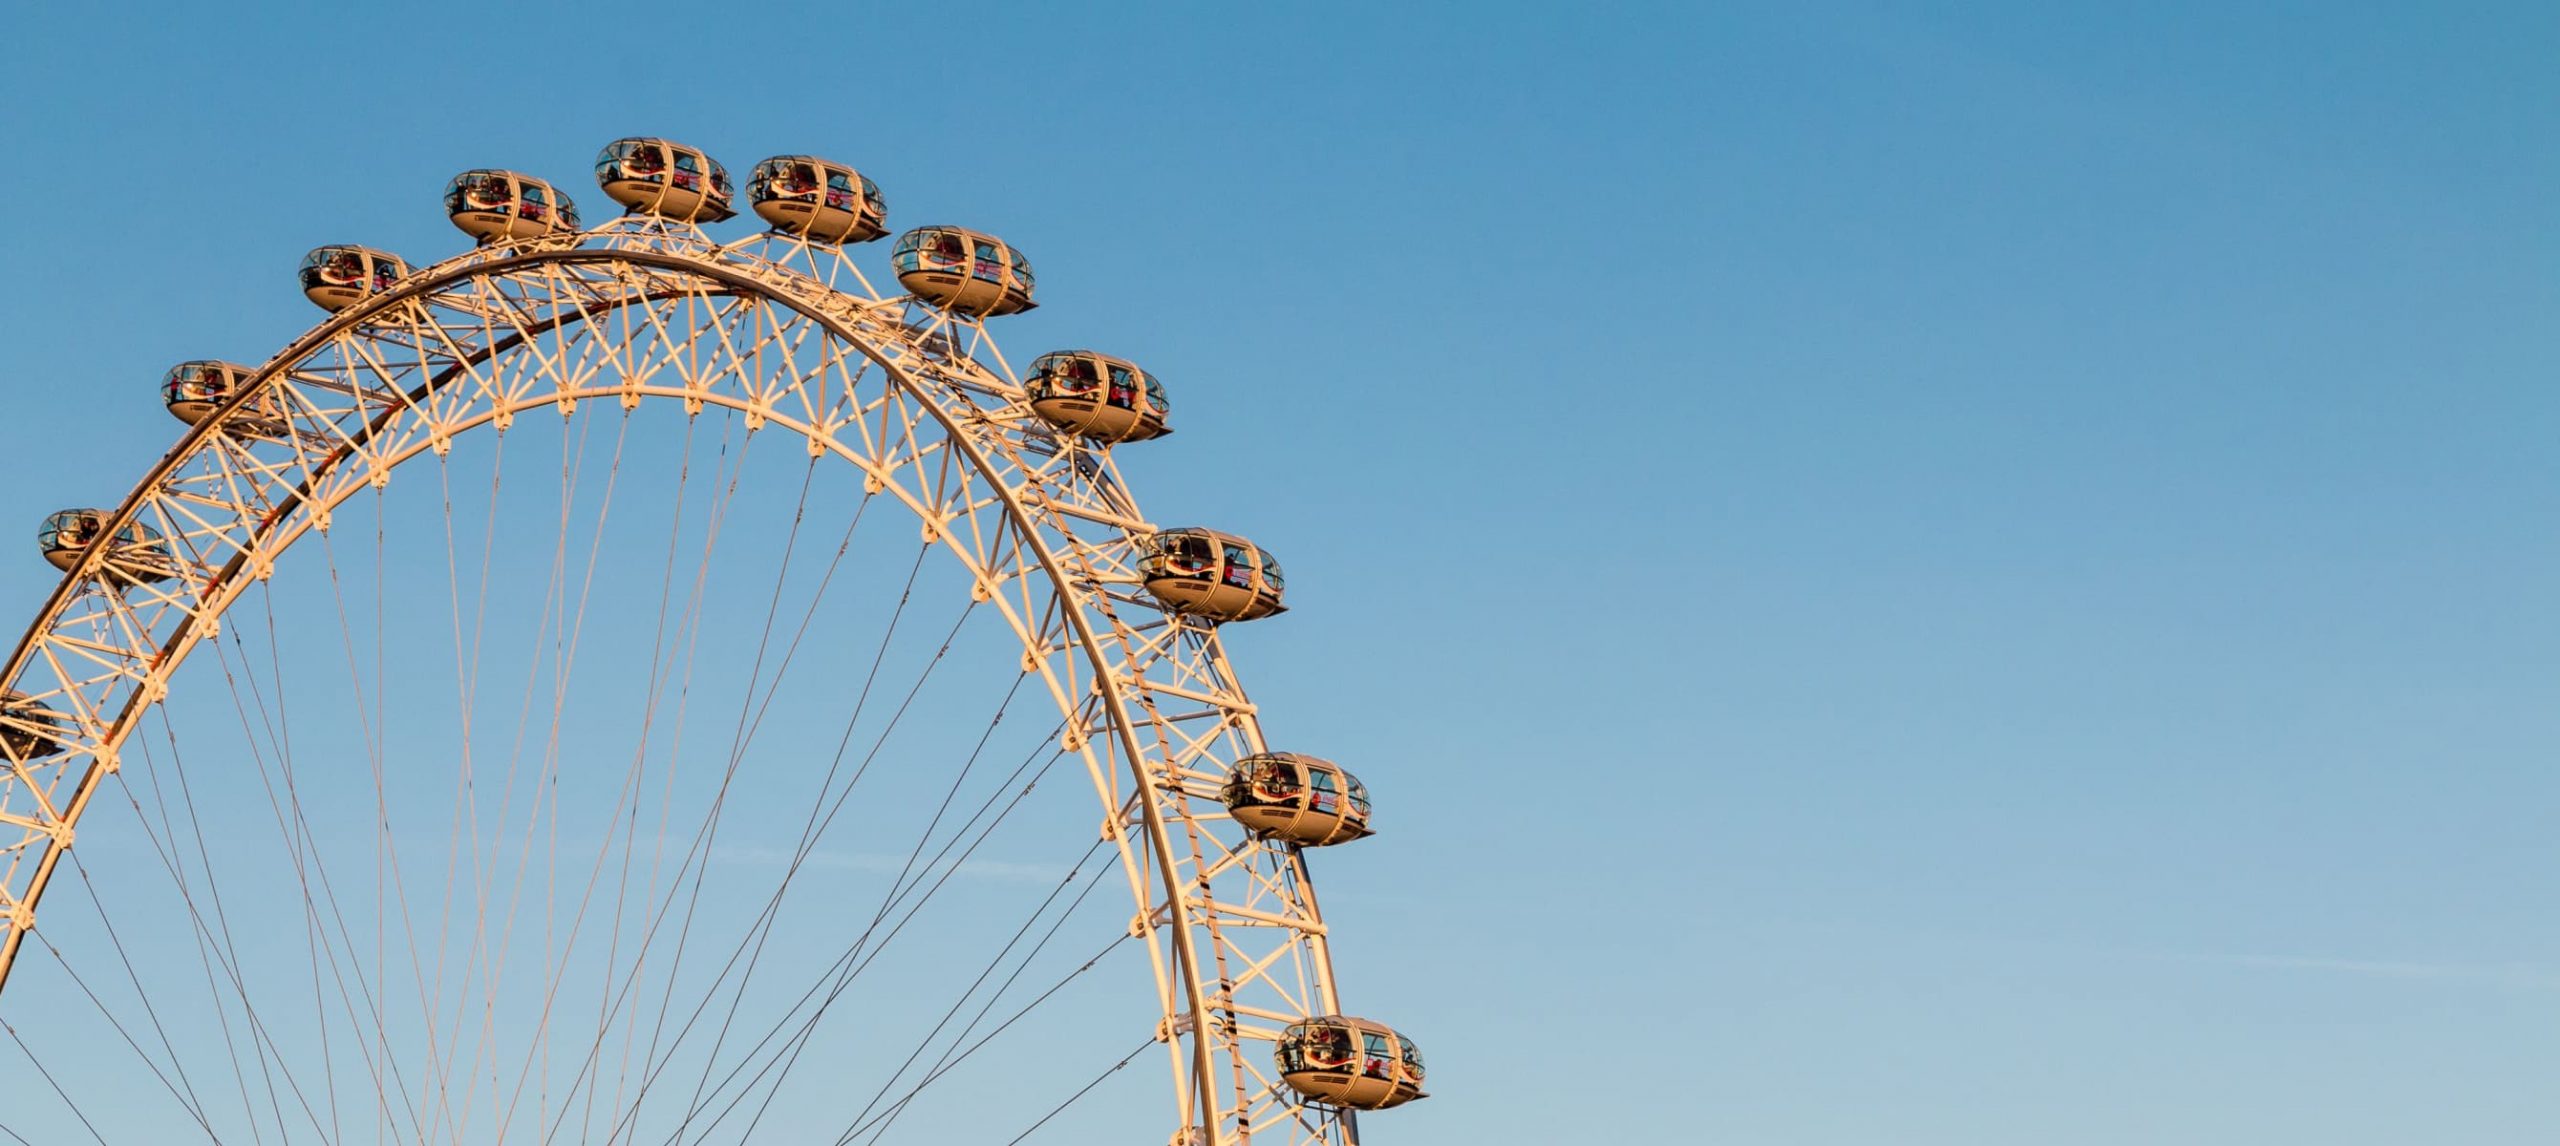 Ultimate Guide: 11 Fun Facts About The London Eye